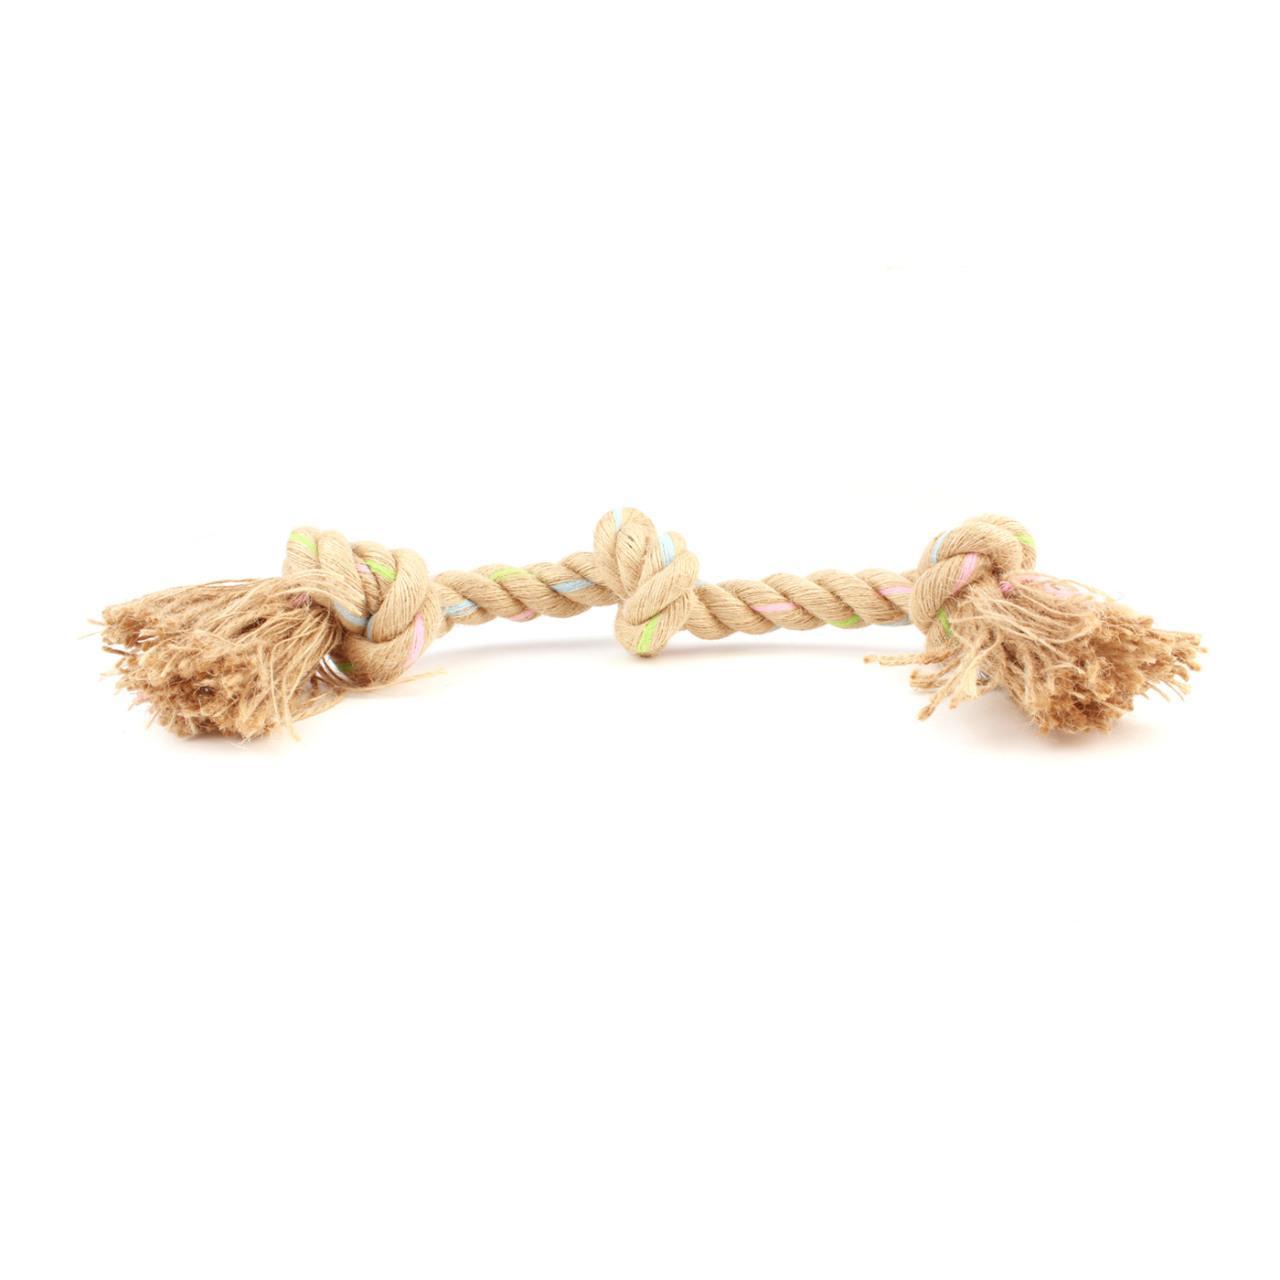 An image of Beco Pets Jungle Rope Triple Knot Medium